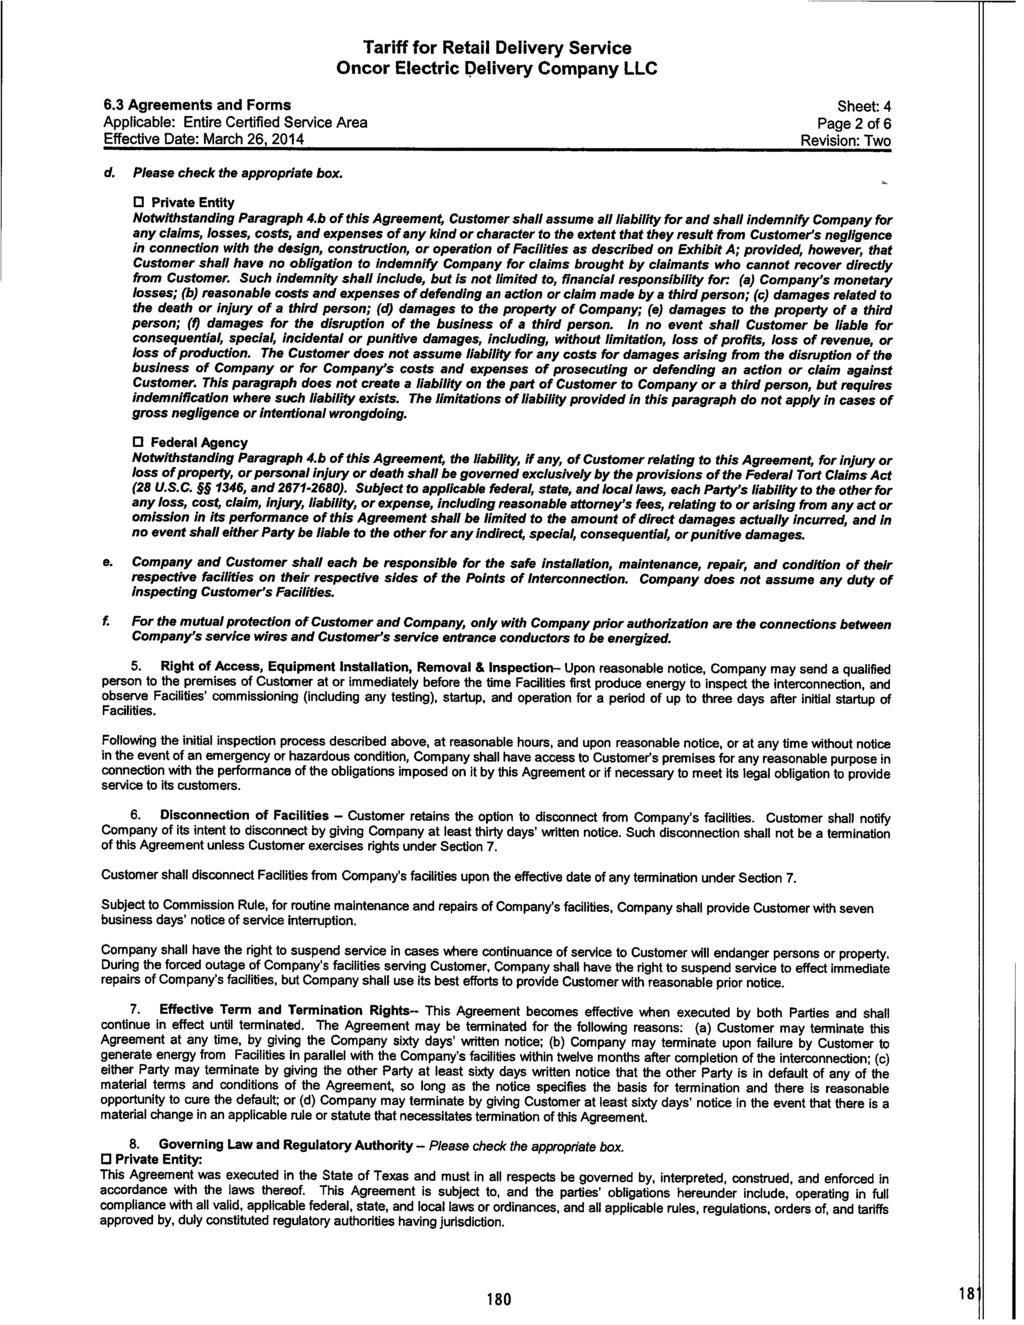 6.3 Agreements and Forms Sheet: 4 Applicable: Entire Certified Service Area Page 2 of 6 Effective Date: March 26, 2014 Revision: Two d. Please check the appropriate box.